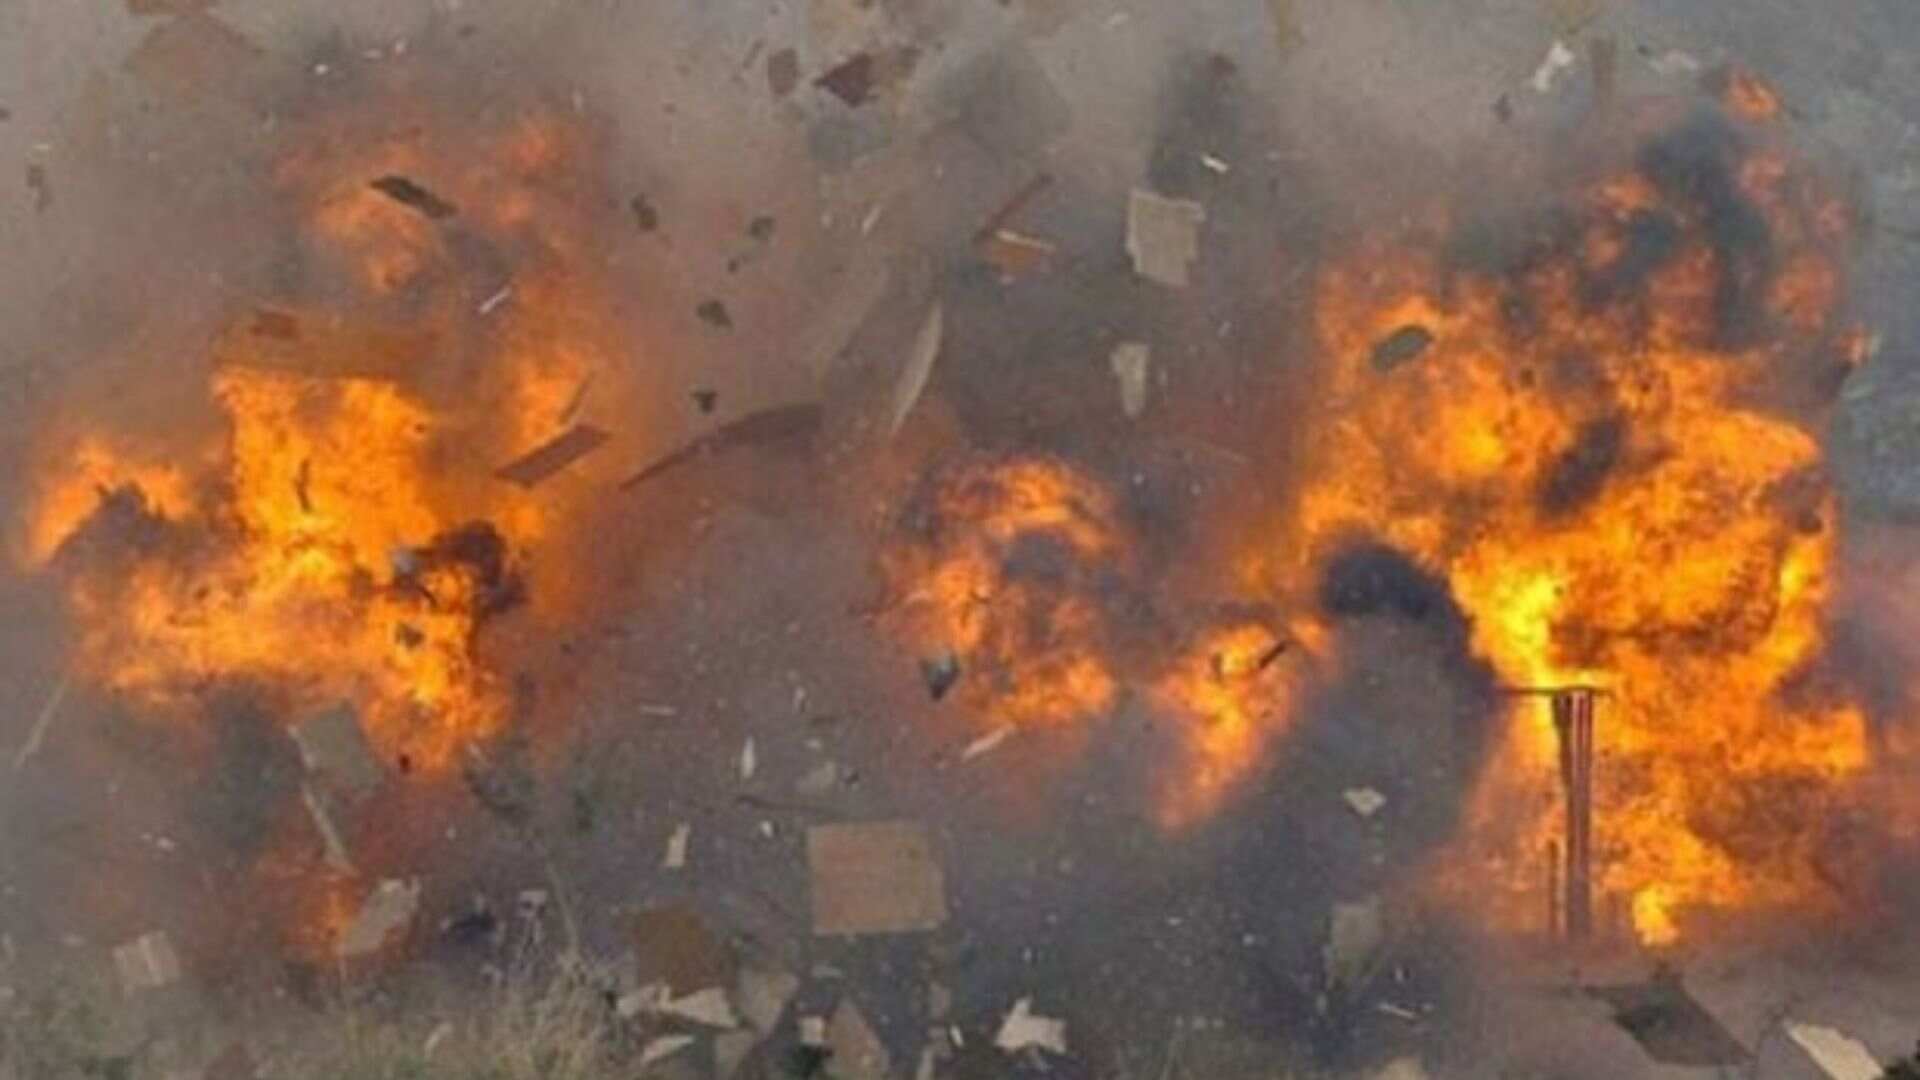 Nagpur Blast: Director, Manager Arrested After Explosion Claims Six Lives